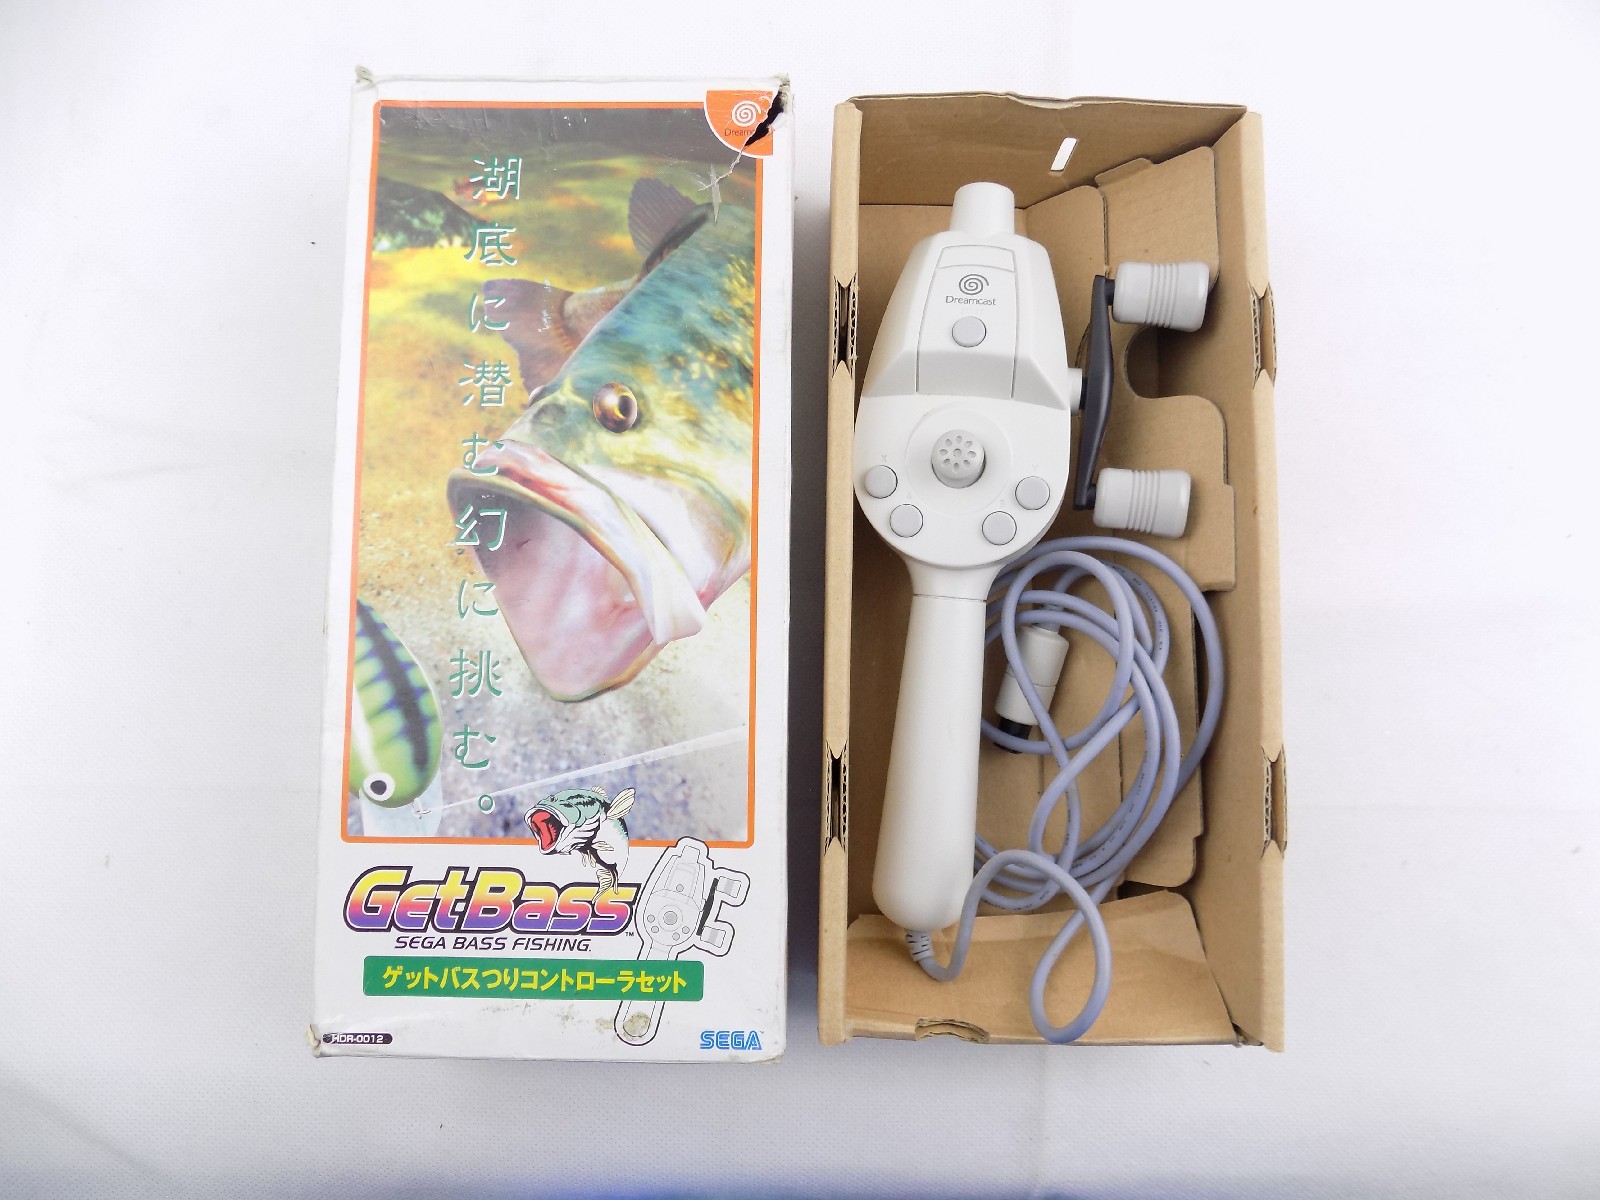 Genuine Boxed Sega Dreamcast GetBass Fishing Rod Controller – Tested,  Works! - Starboard Games